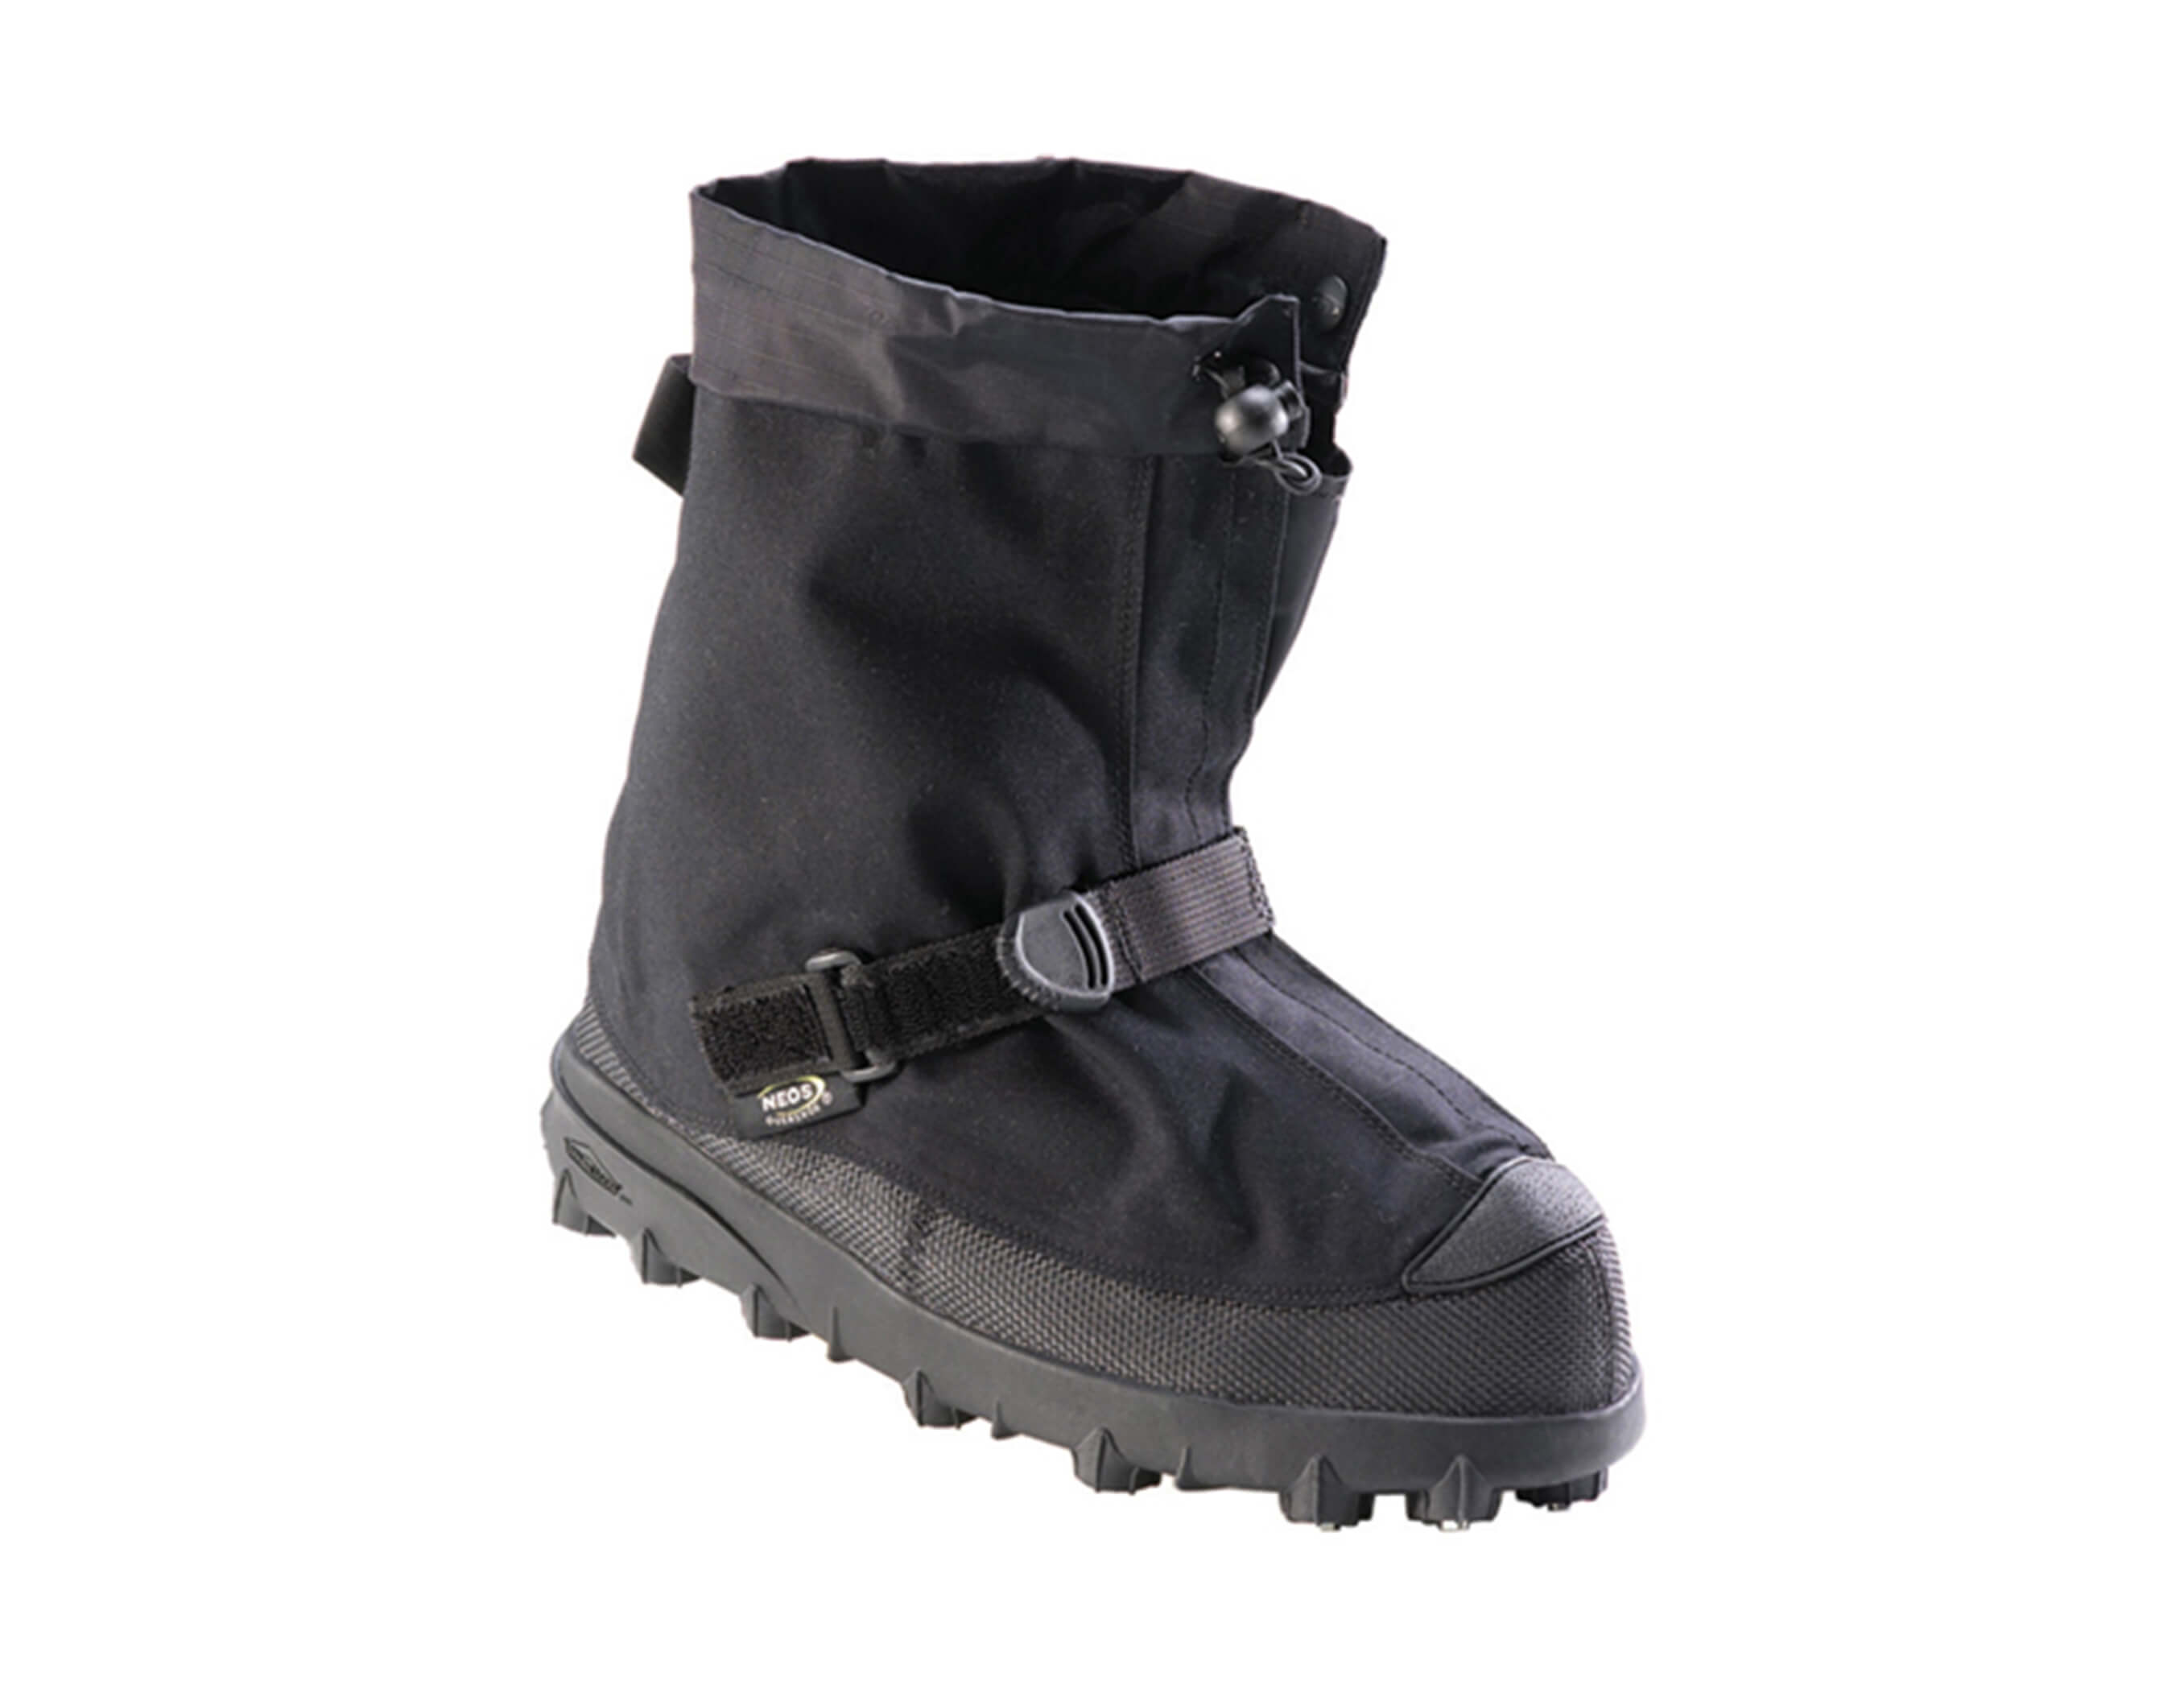 Neos Voyager Stabilicers Overshoes L9-10.5